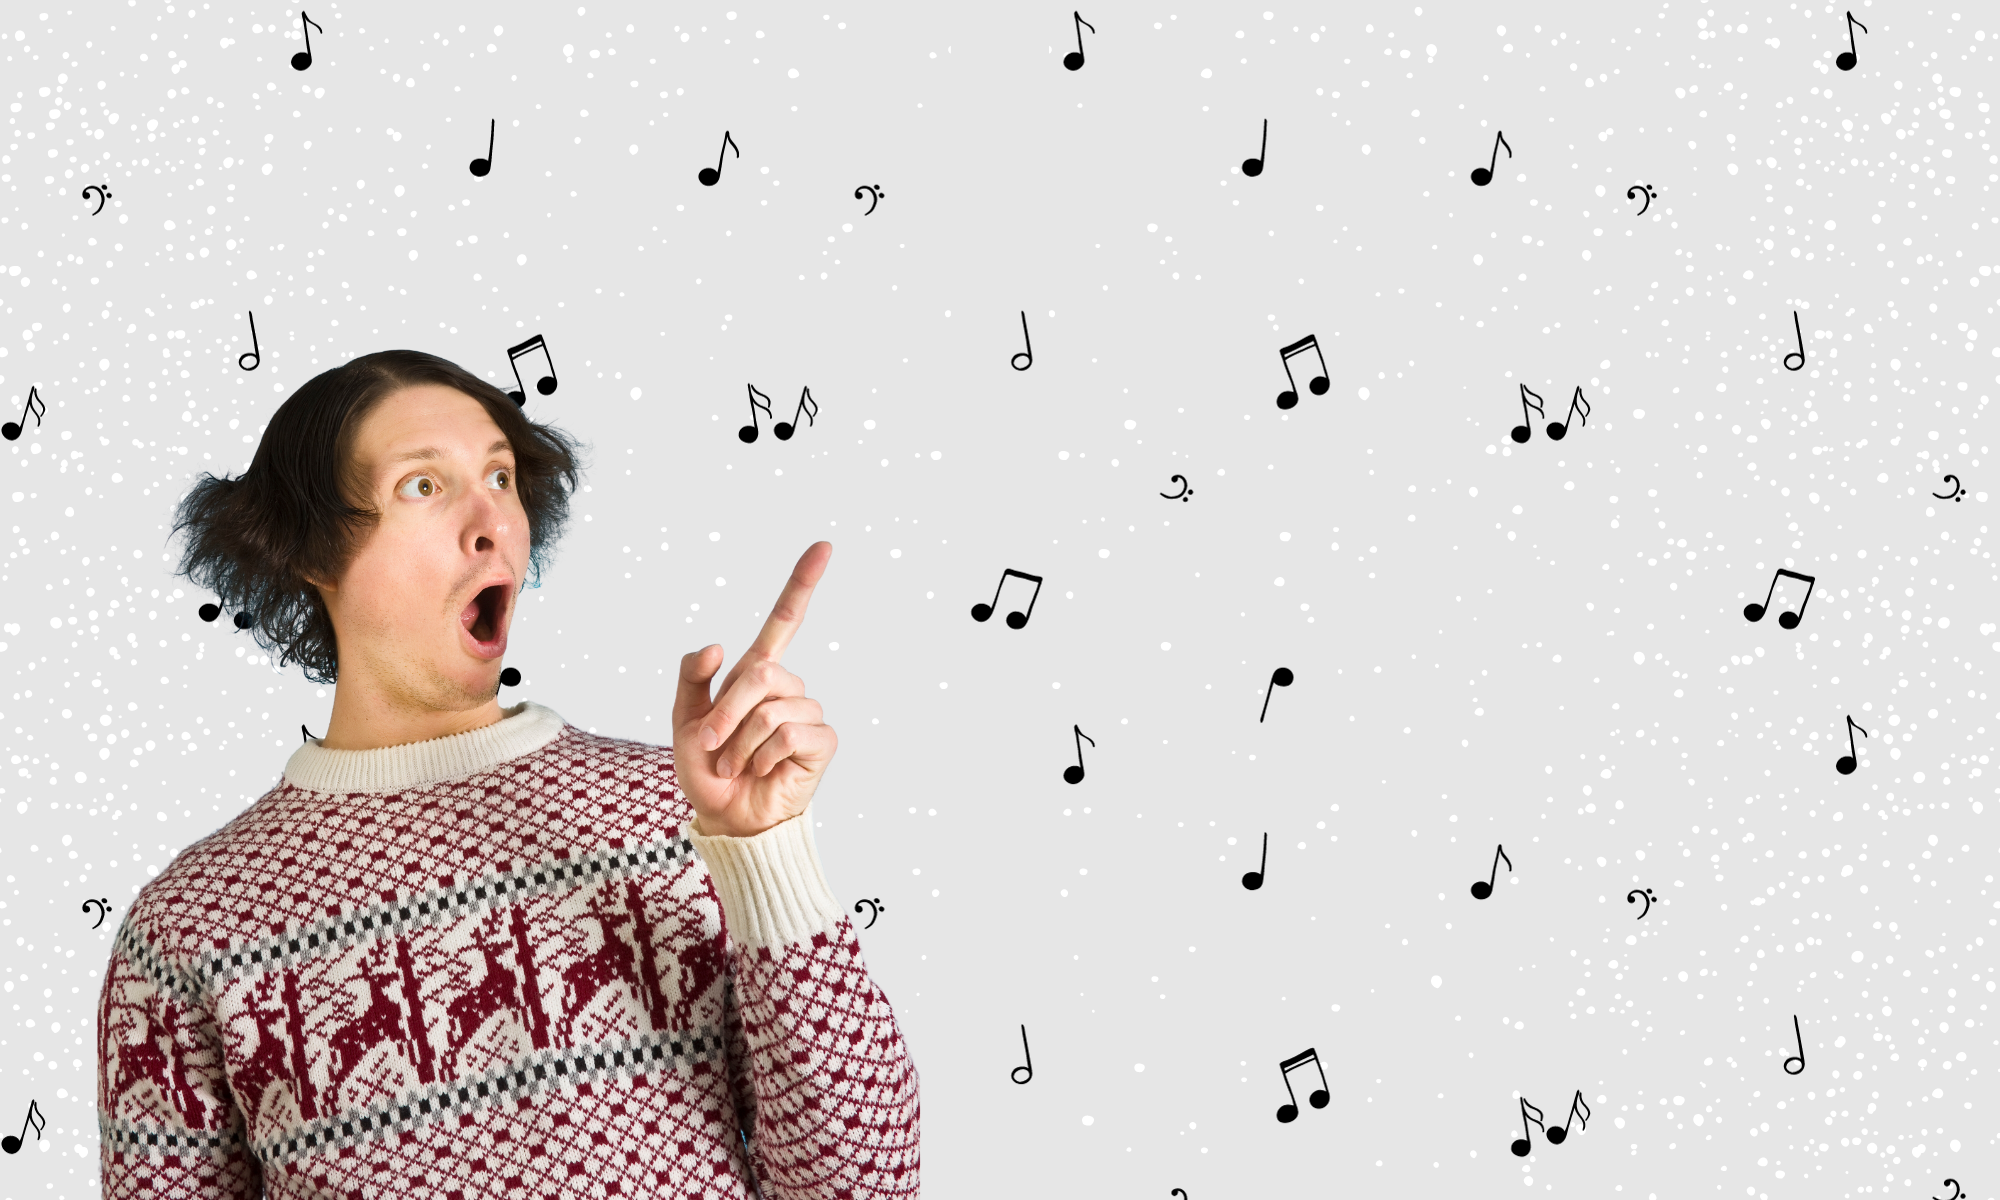 A quirky guy in a Christmas sweater pointing to music notes.